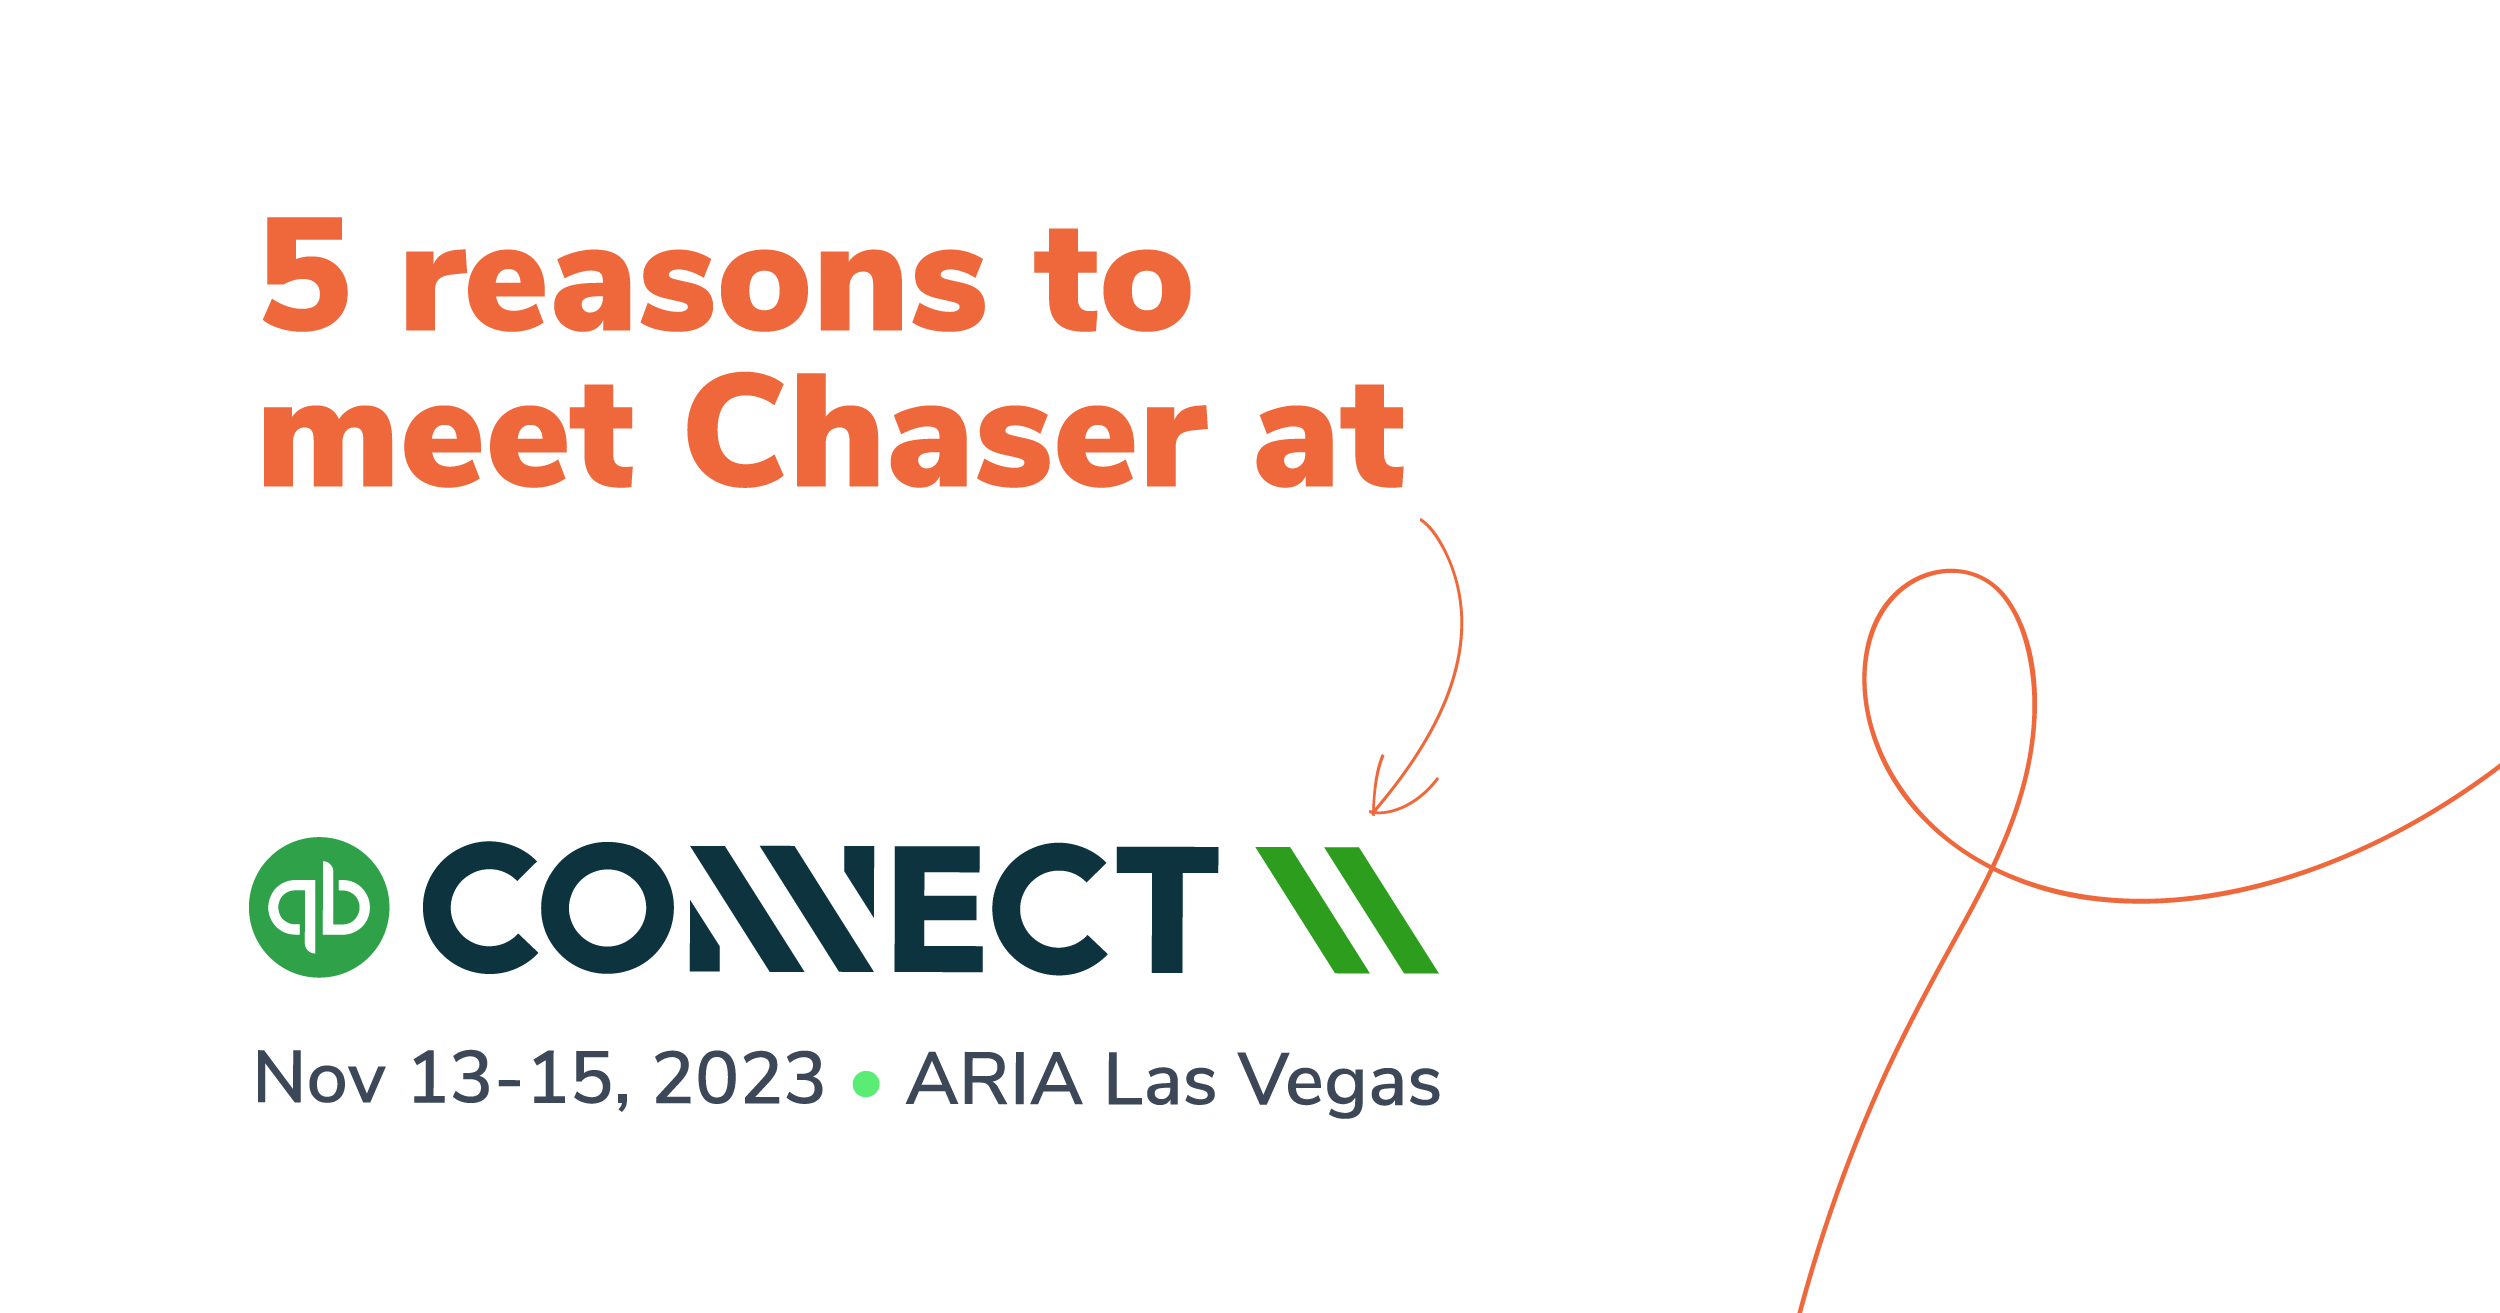 5 reasons to meet Chaser at QuickBooks Connect 2023